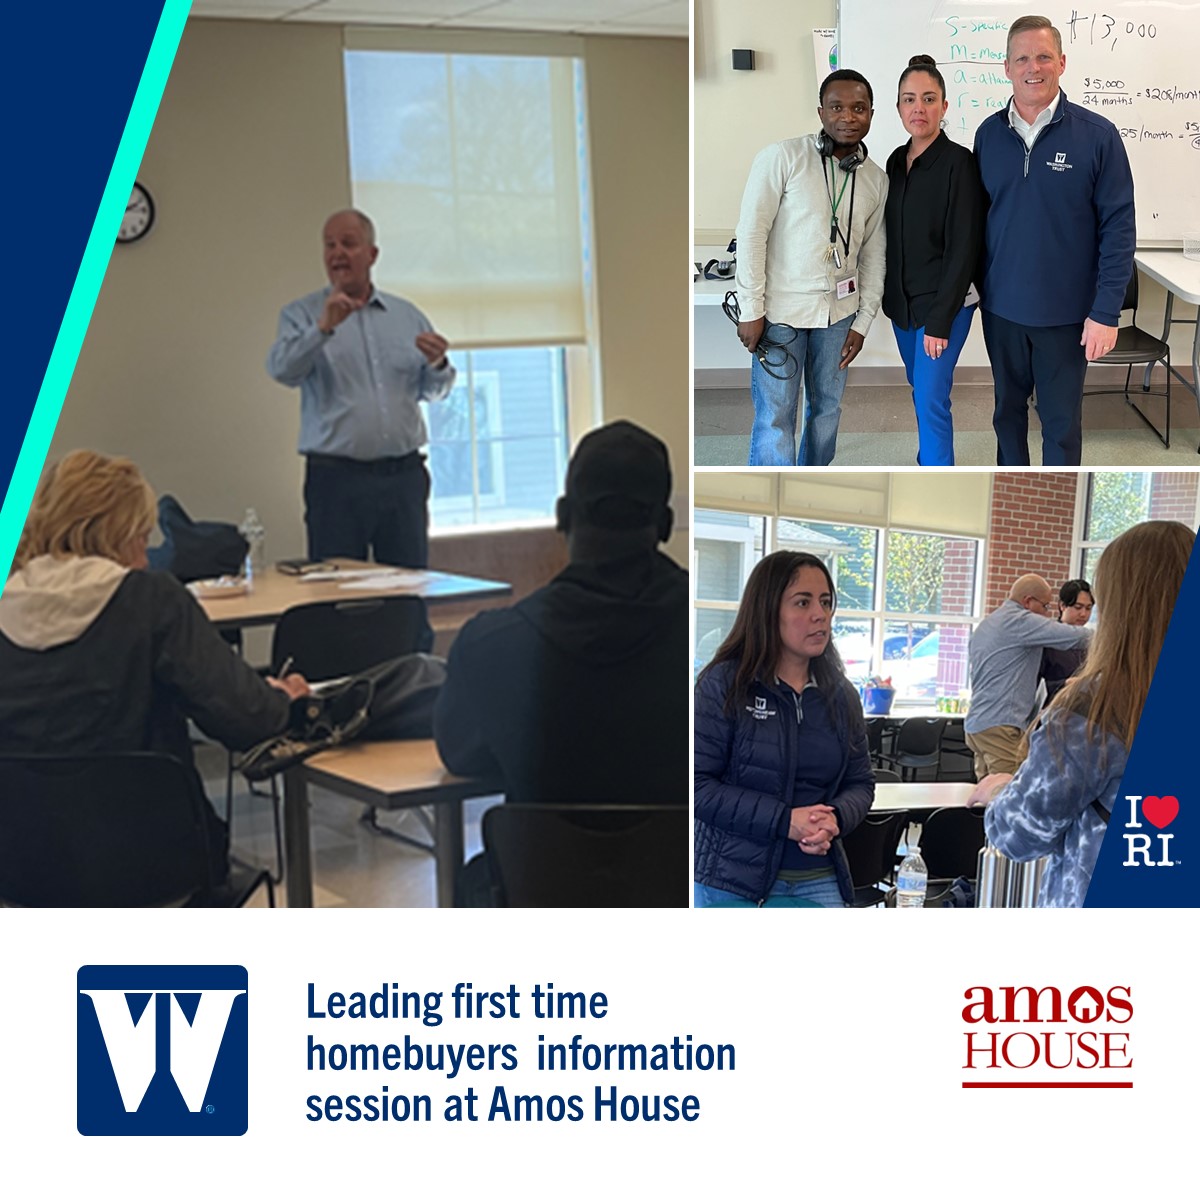 We were thrilled to be at @amoshouse presenting 'intro to homeownership' for those hoping to be first-time homebuyers, & to support individuals & families at every step of their financial journey! ▶️ ow.ly/W6nI50RvaFt What we value is you.™ #WashTrust #firsttimehomebuyers